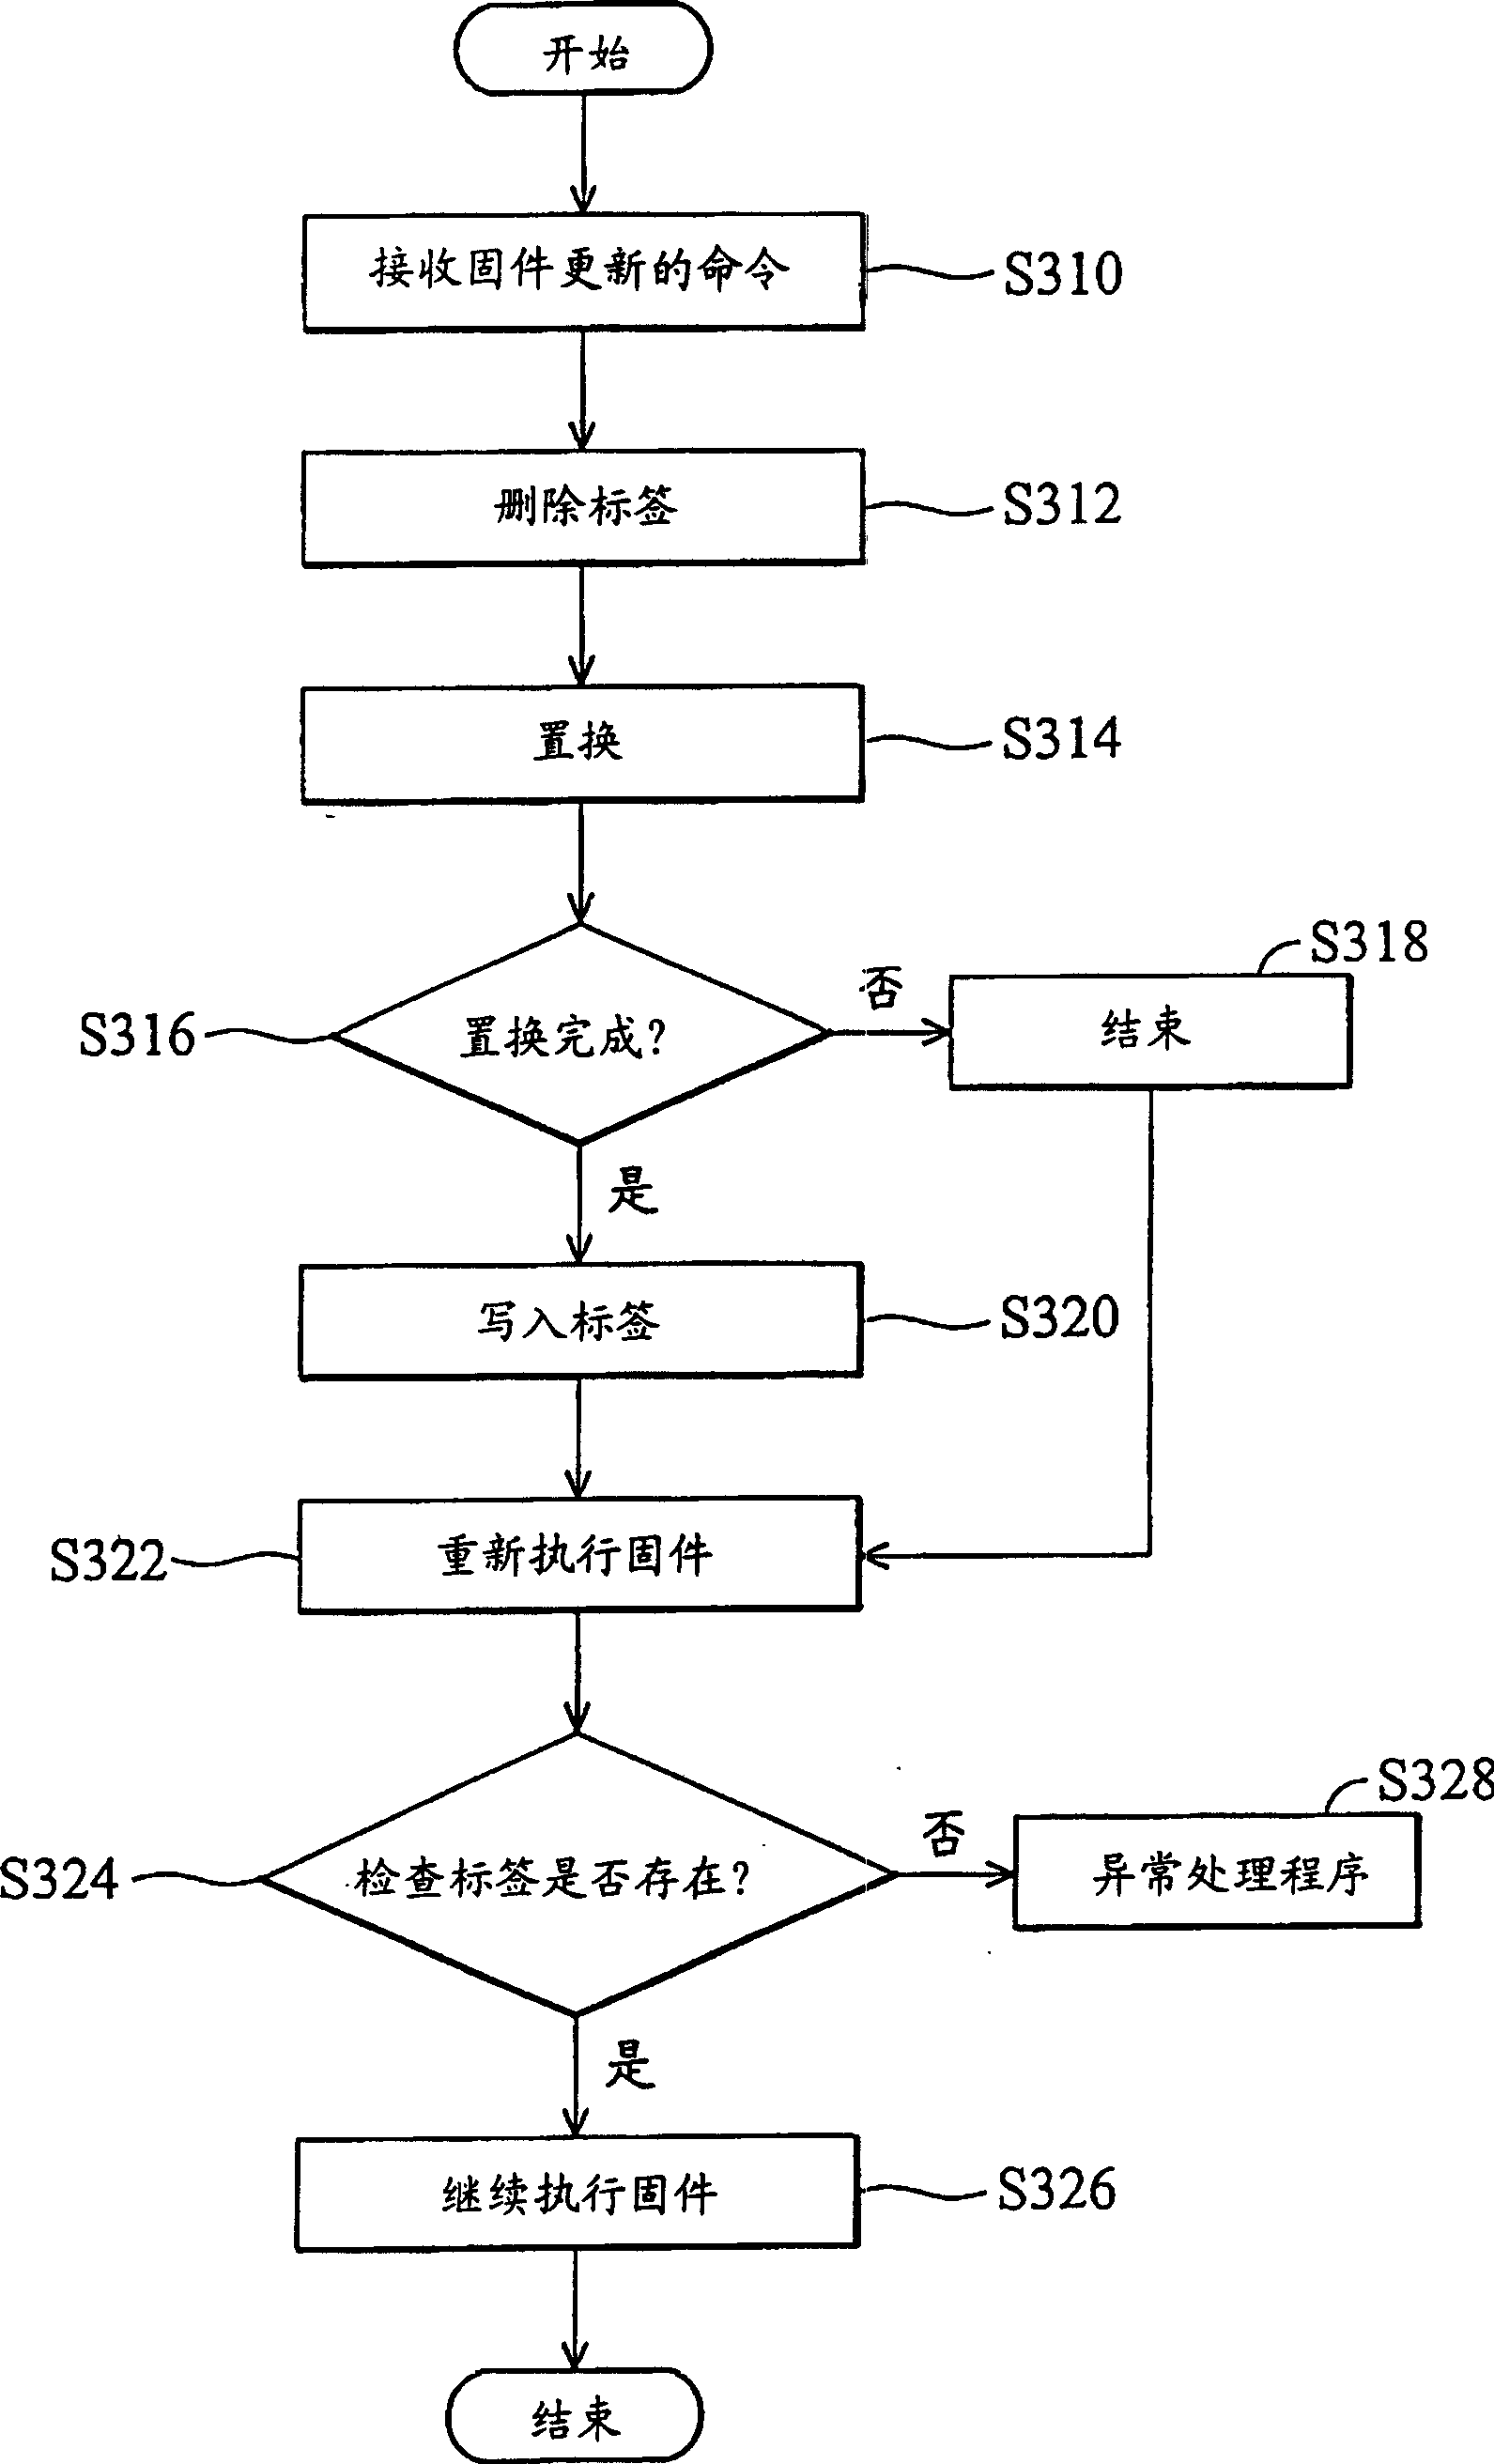 Firmware upgrade method and system for executing said method